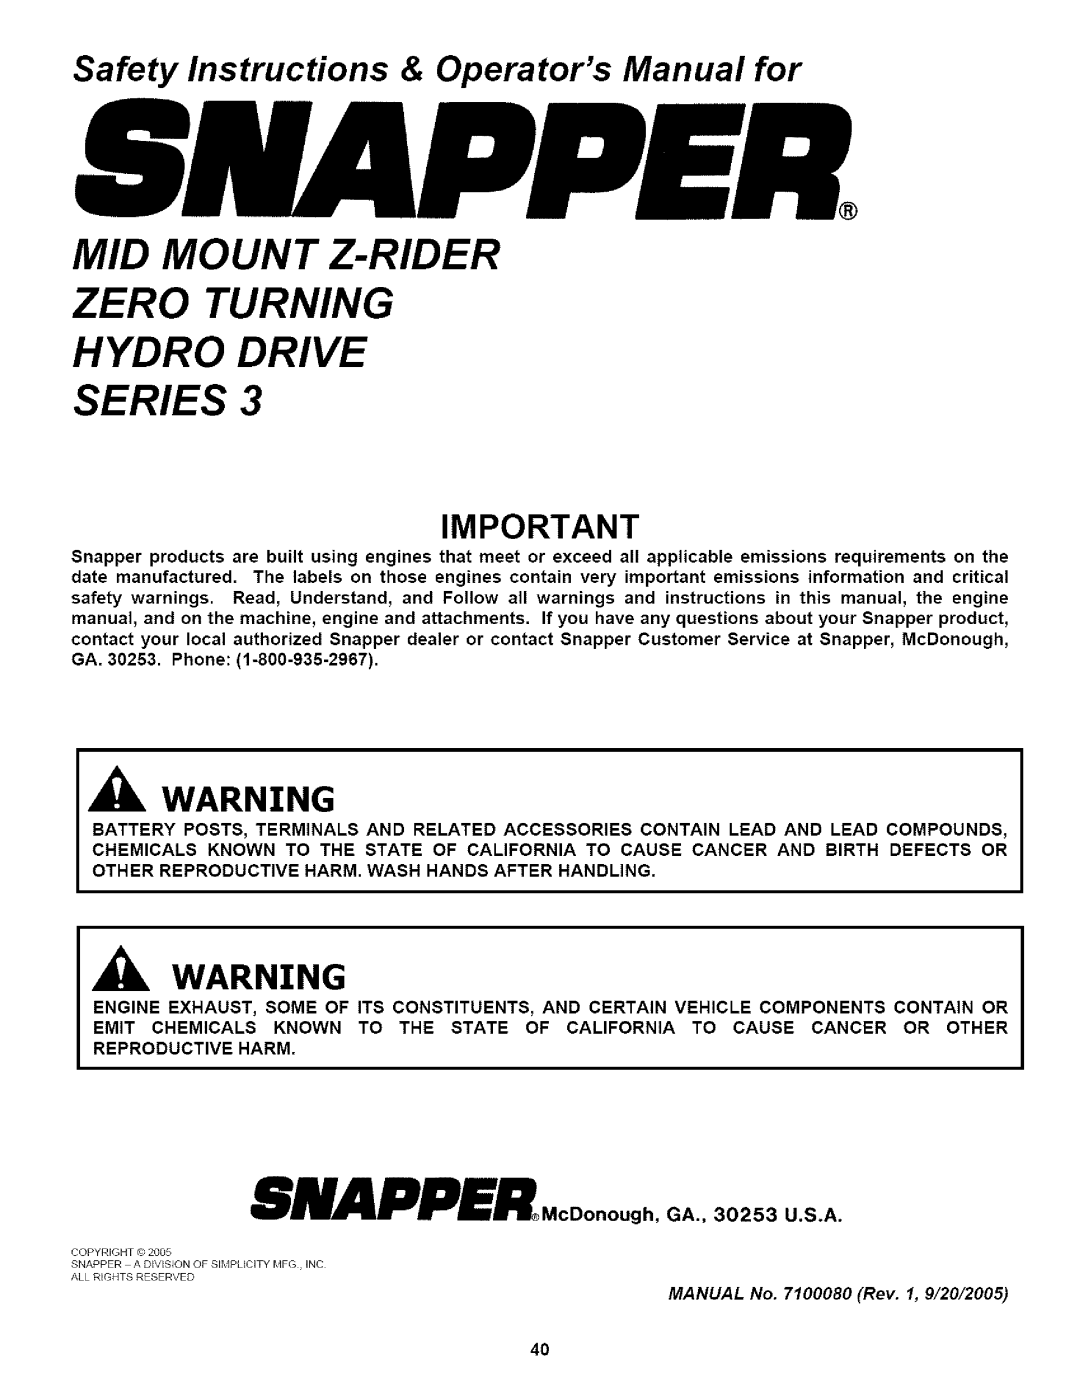 Snapper NZM21523KWV _l_ WARNING, GA., 30253 U.S.A, SNAPPERo.coonouo, Mid Mount Z-Rider Zero Turning Hydro Drive Series 